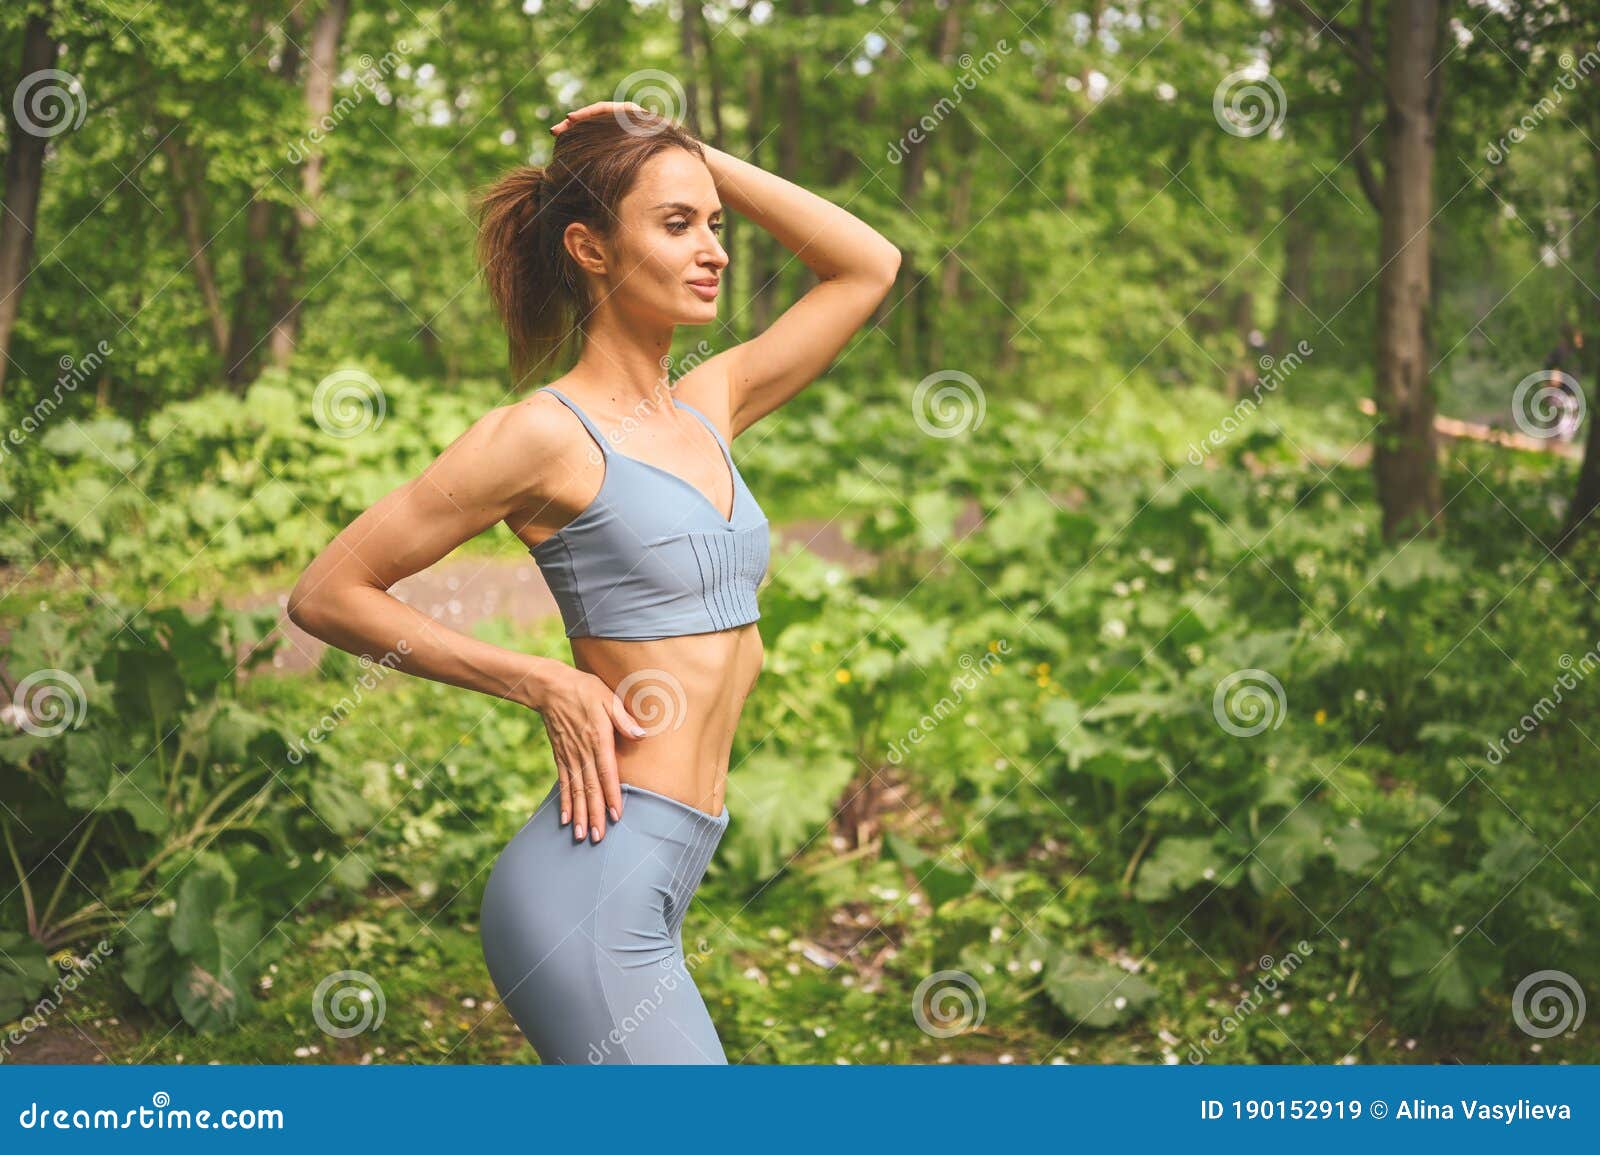 Beautiful Fit Woman In In Sportswear Muscular Slim Attractive Female With Flat Belly In Summer